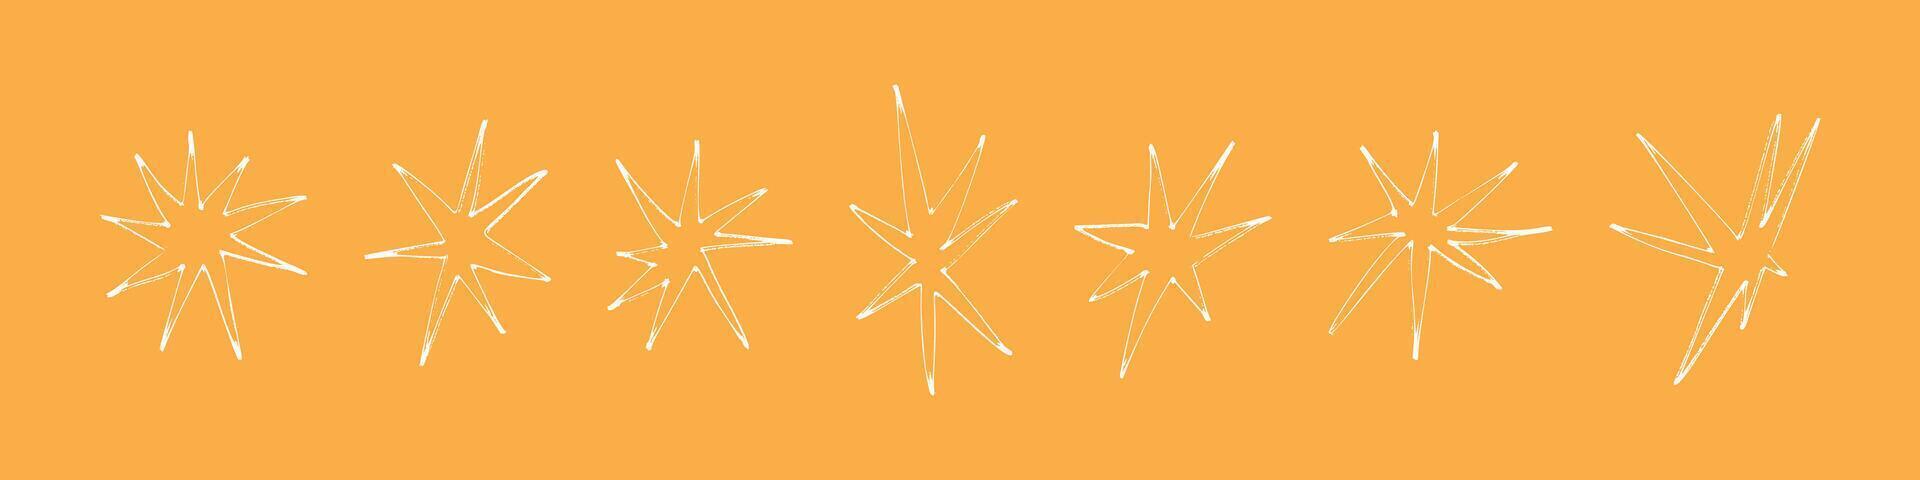 Hand drawn star icons with crayon and pastel lines. Doodle and sketch elements. Flat vector illustration isolated on white background.